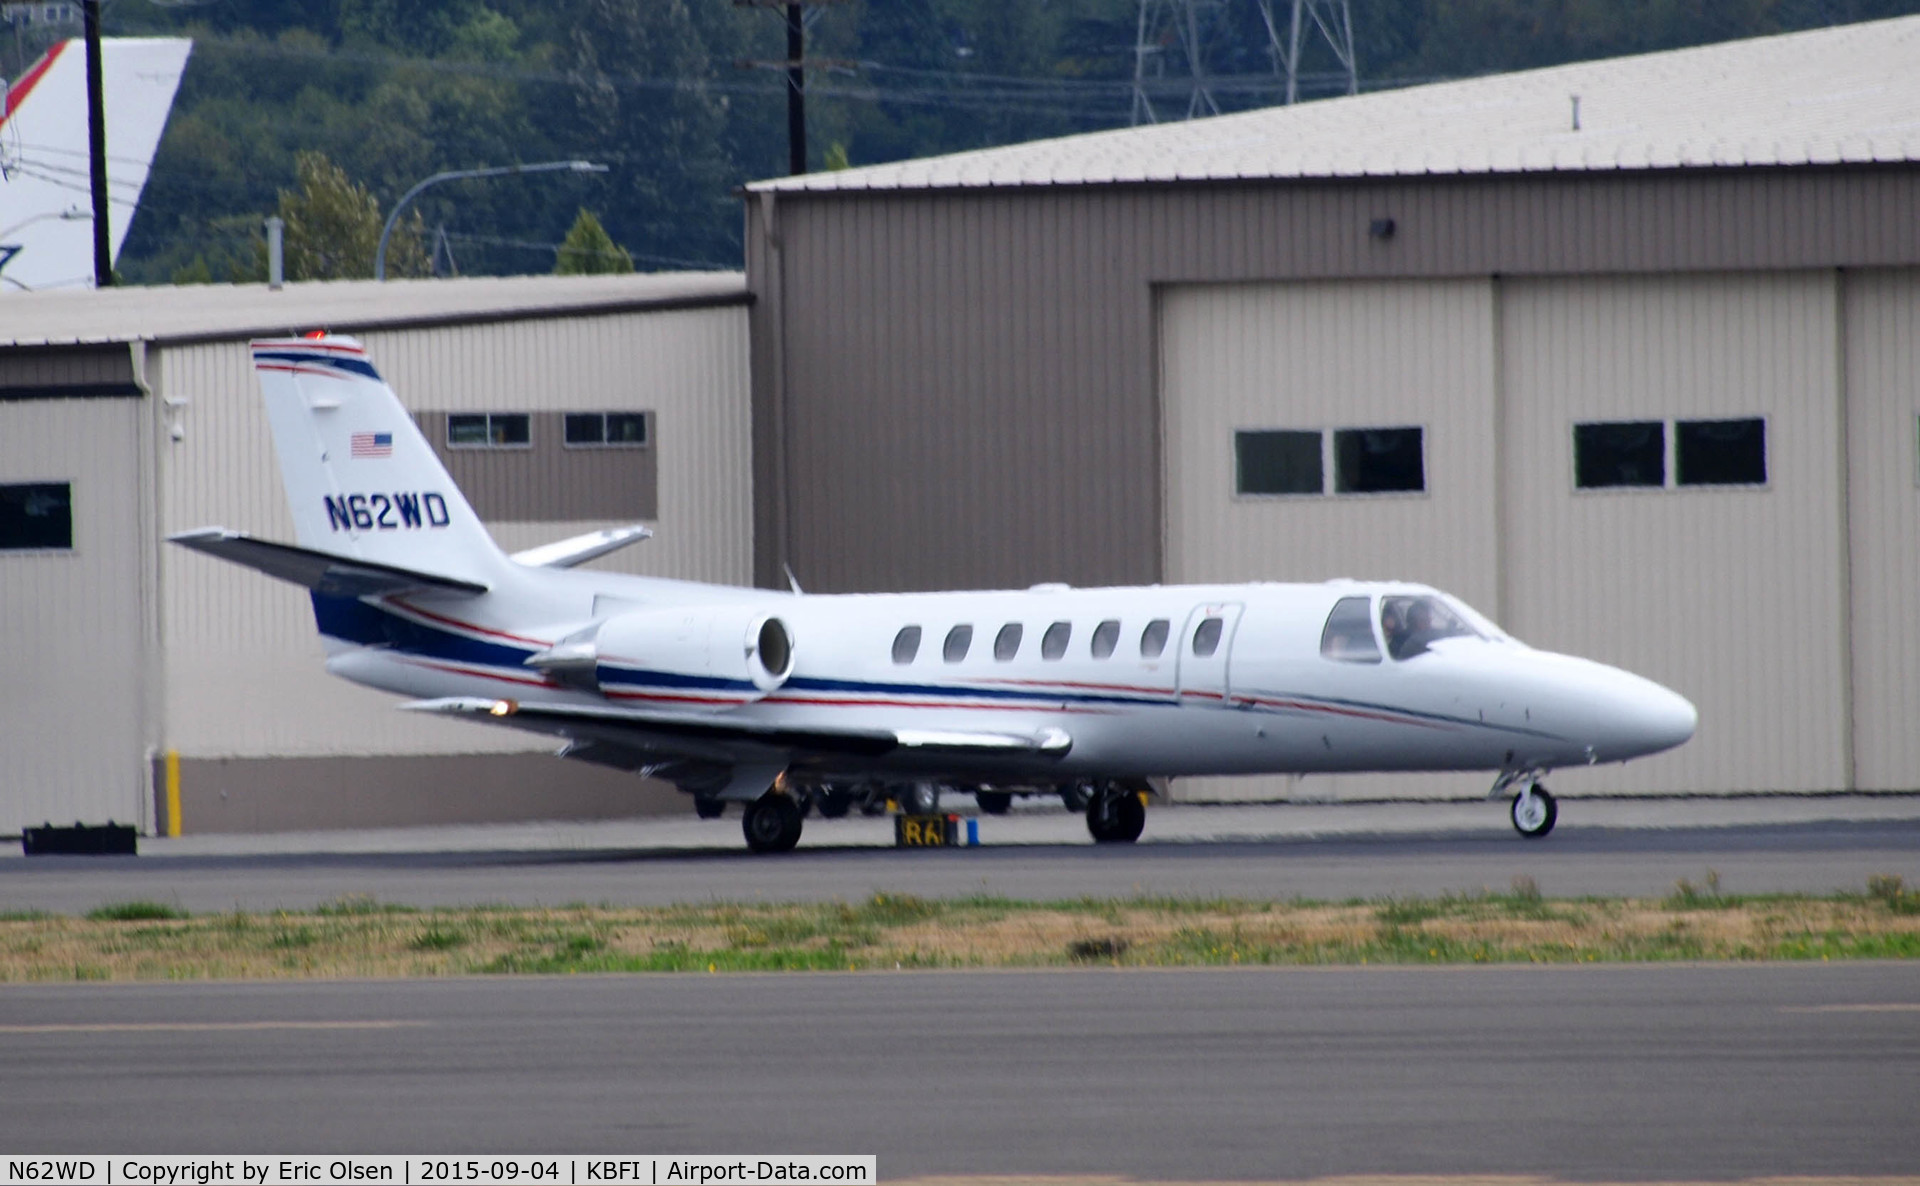 N62WD, 1996 Cessna 560 Citation Ultra C/N 560-0360, Cessna 560 at Boeing Field.